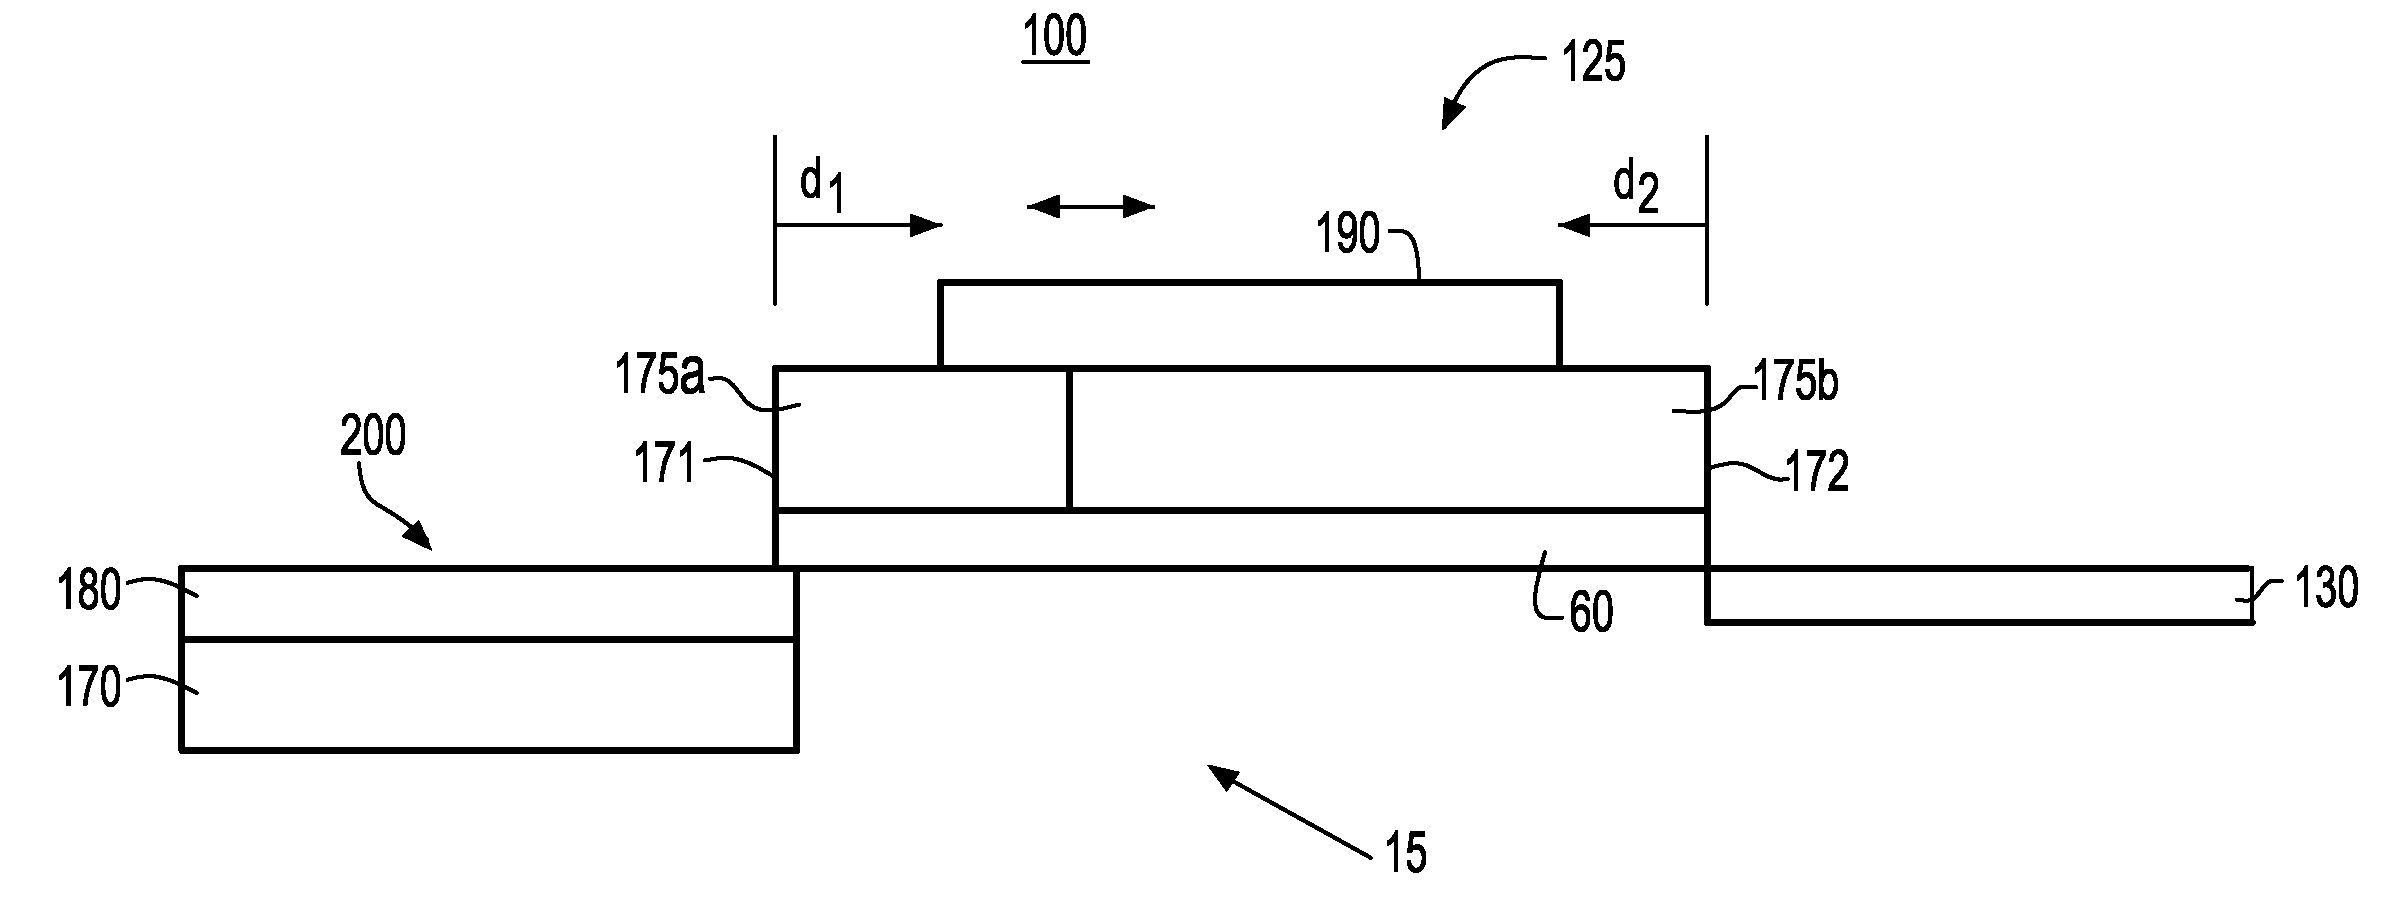 Silicide strapping in imager transfer gate device